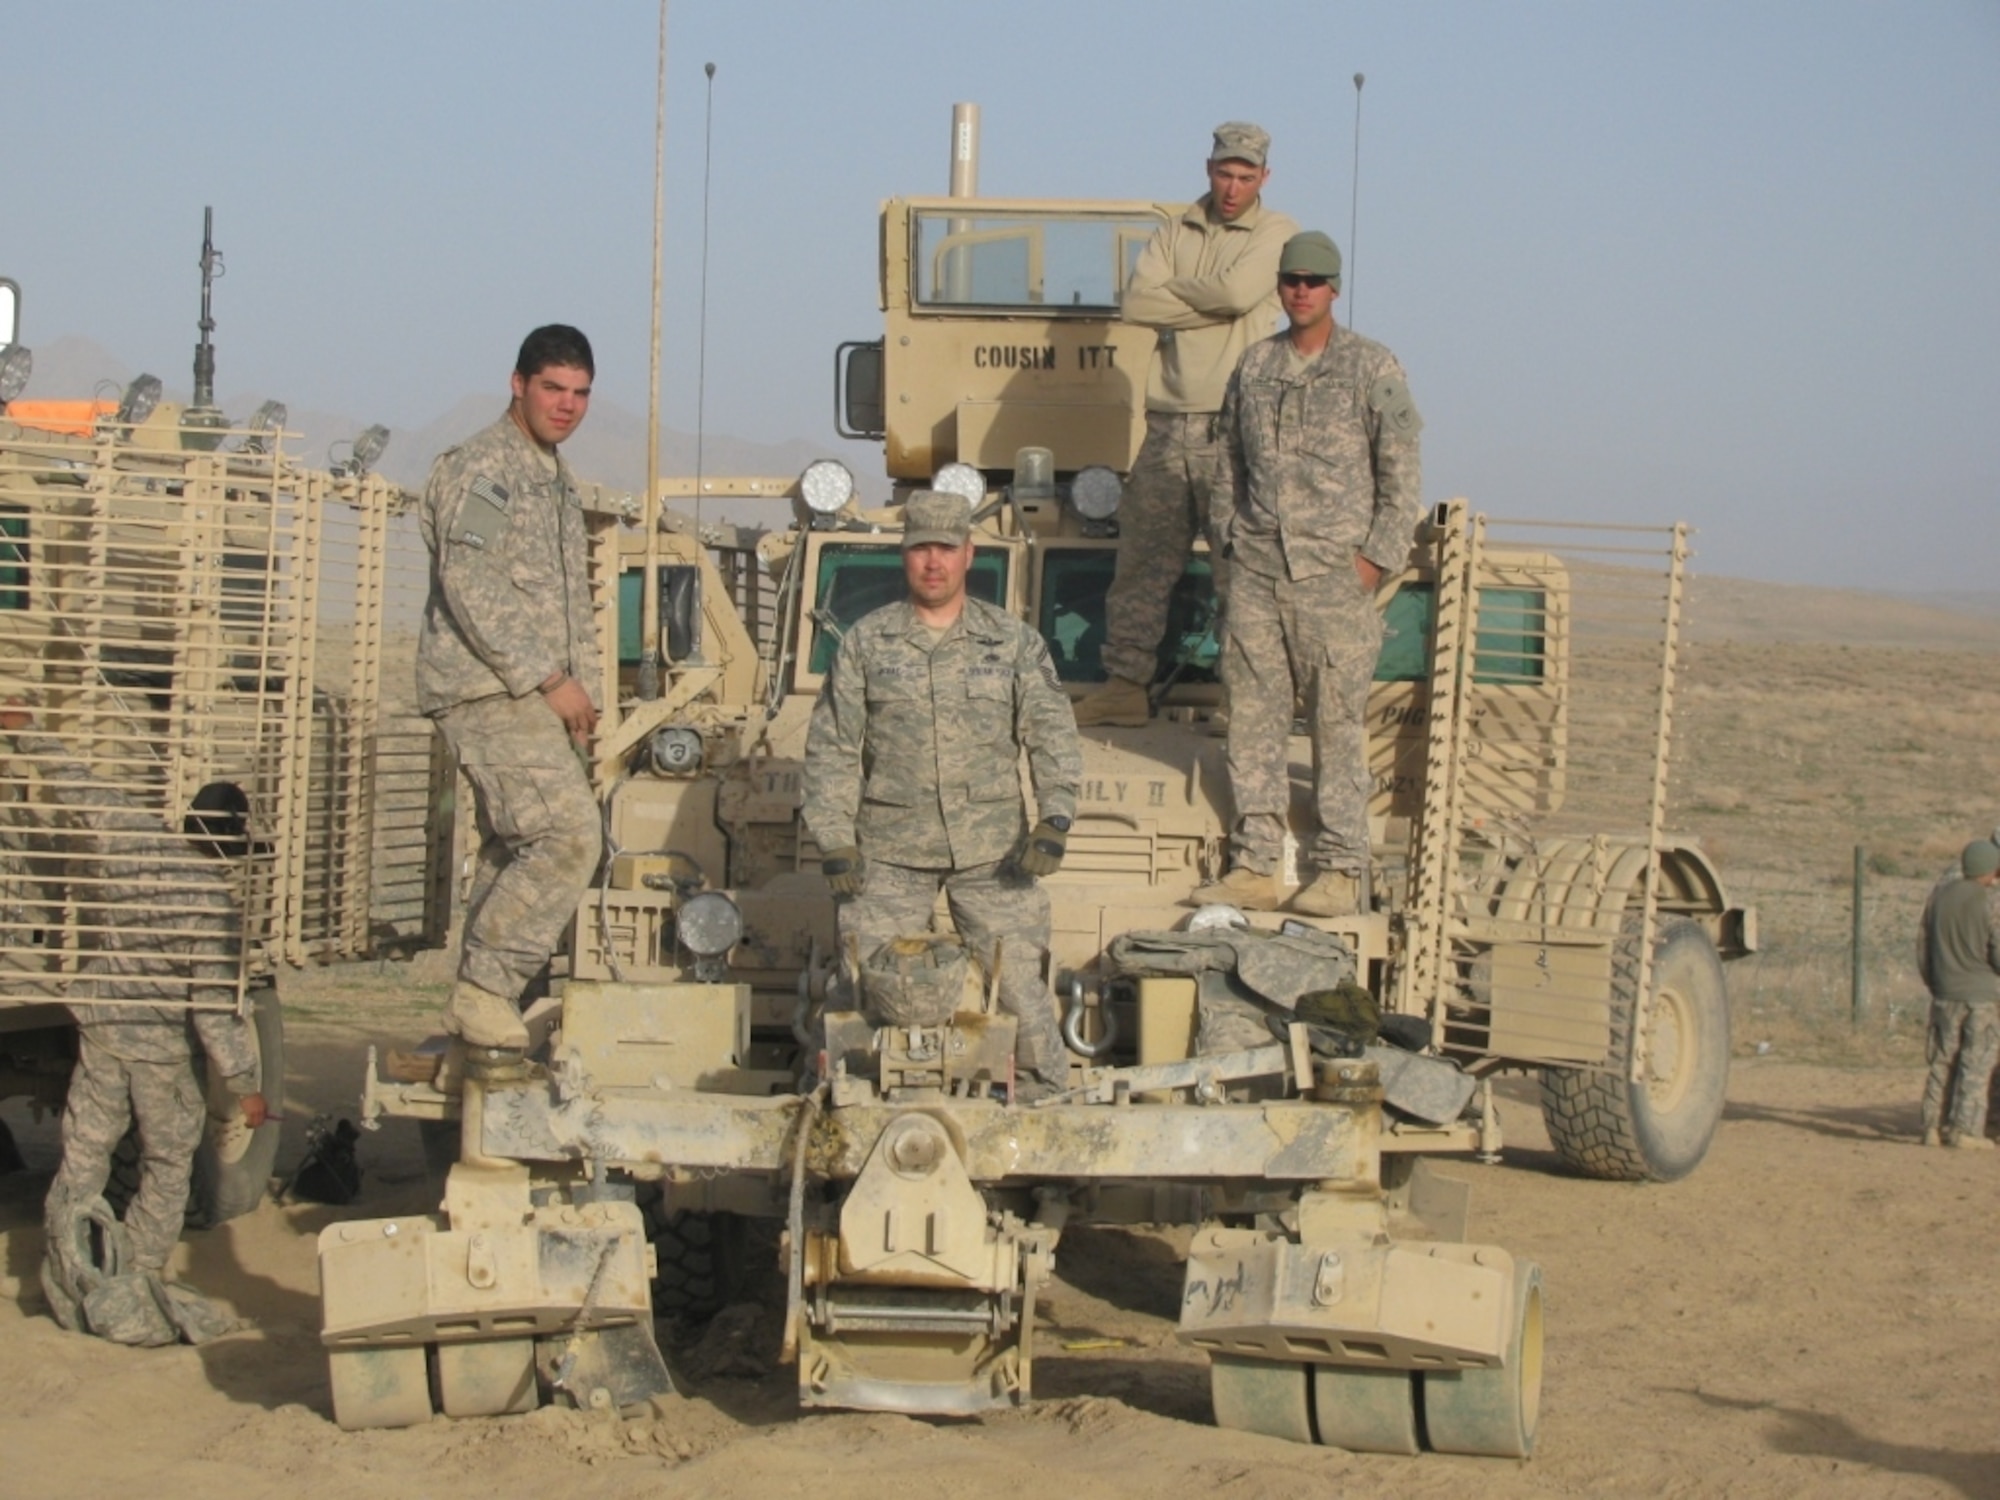 Senior Master Sgt. Kevin McRae stands with the mine roller and the crew after the truck was struck by an IED. Sergeant McRae traveled with the Route Clearance Package from the Kentucky National Guard as on scene support element. (Air Force photo) 